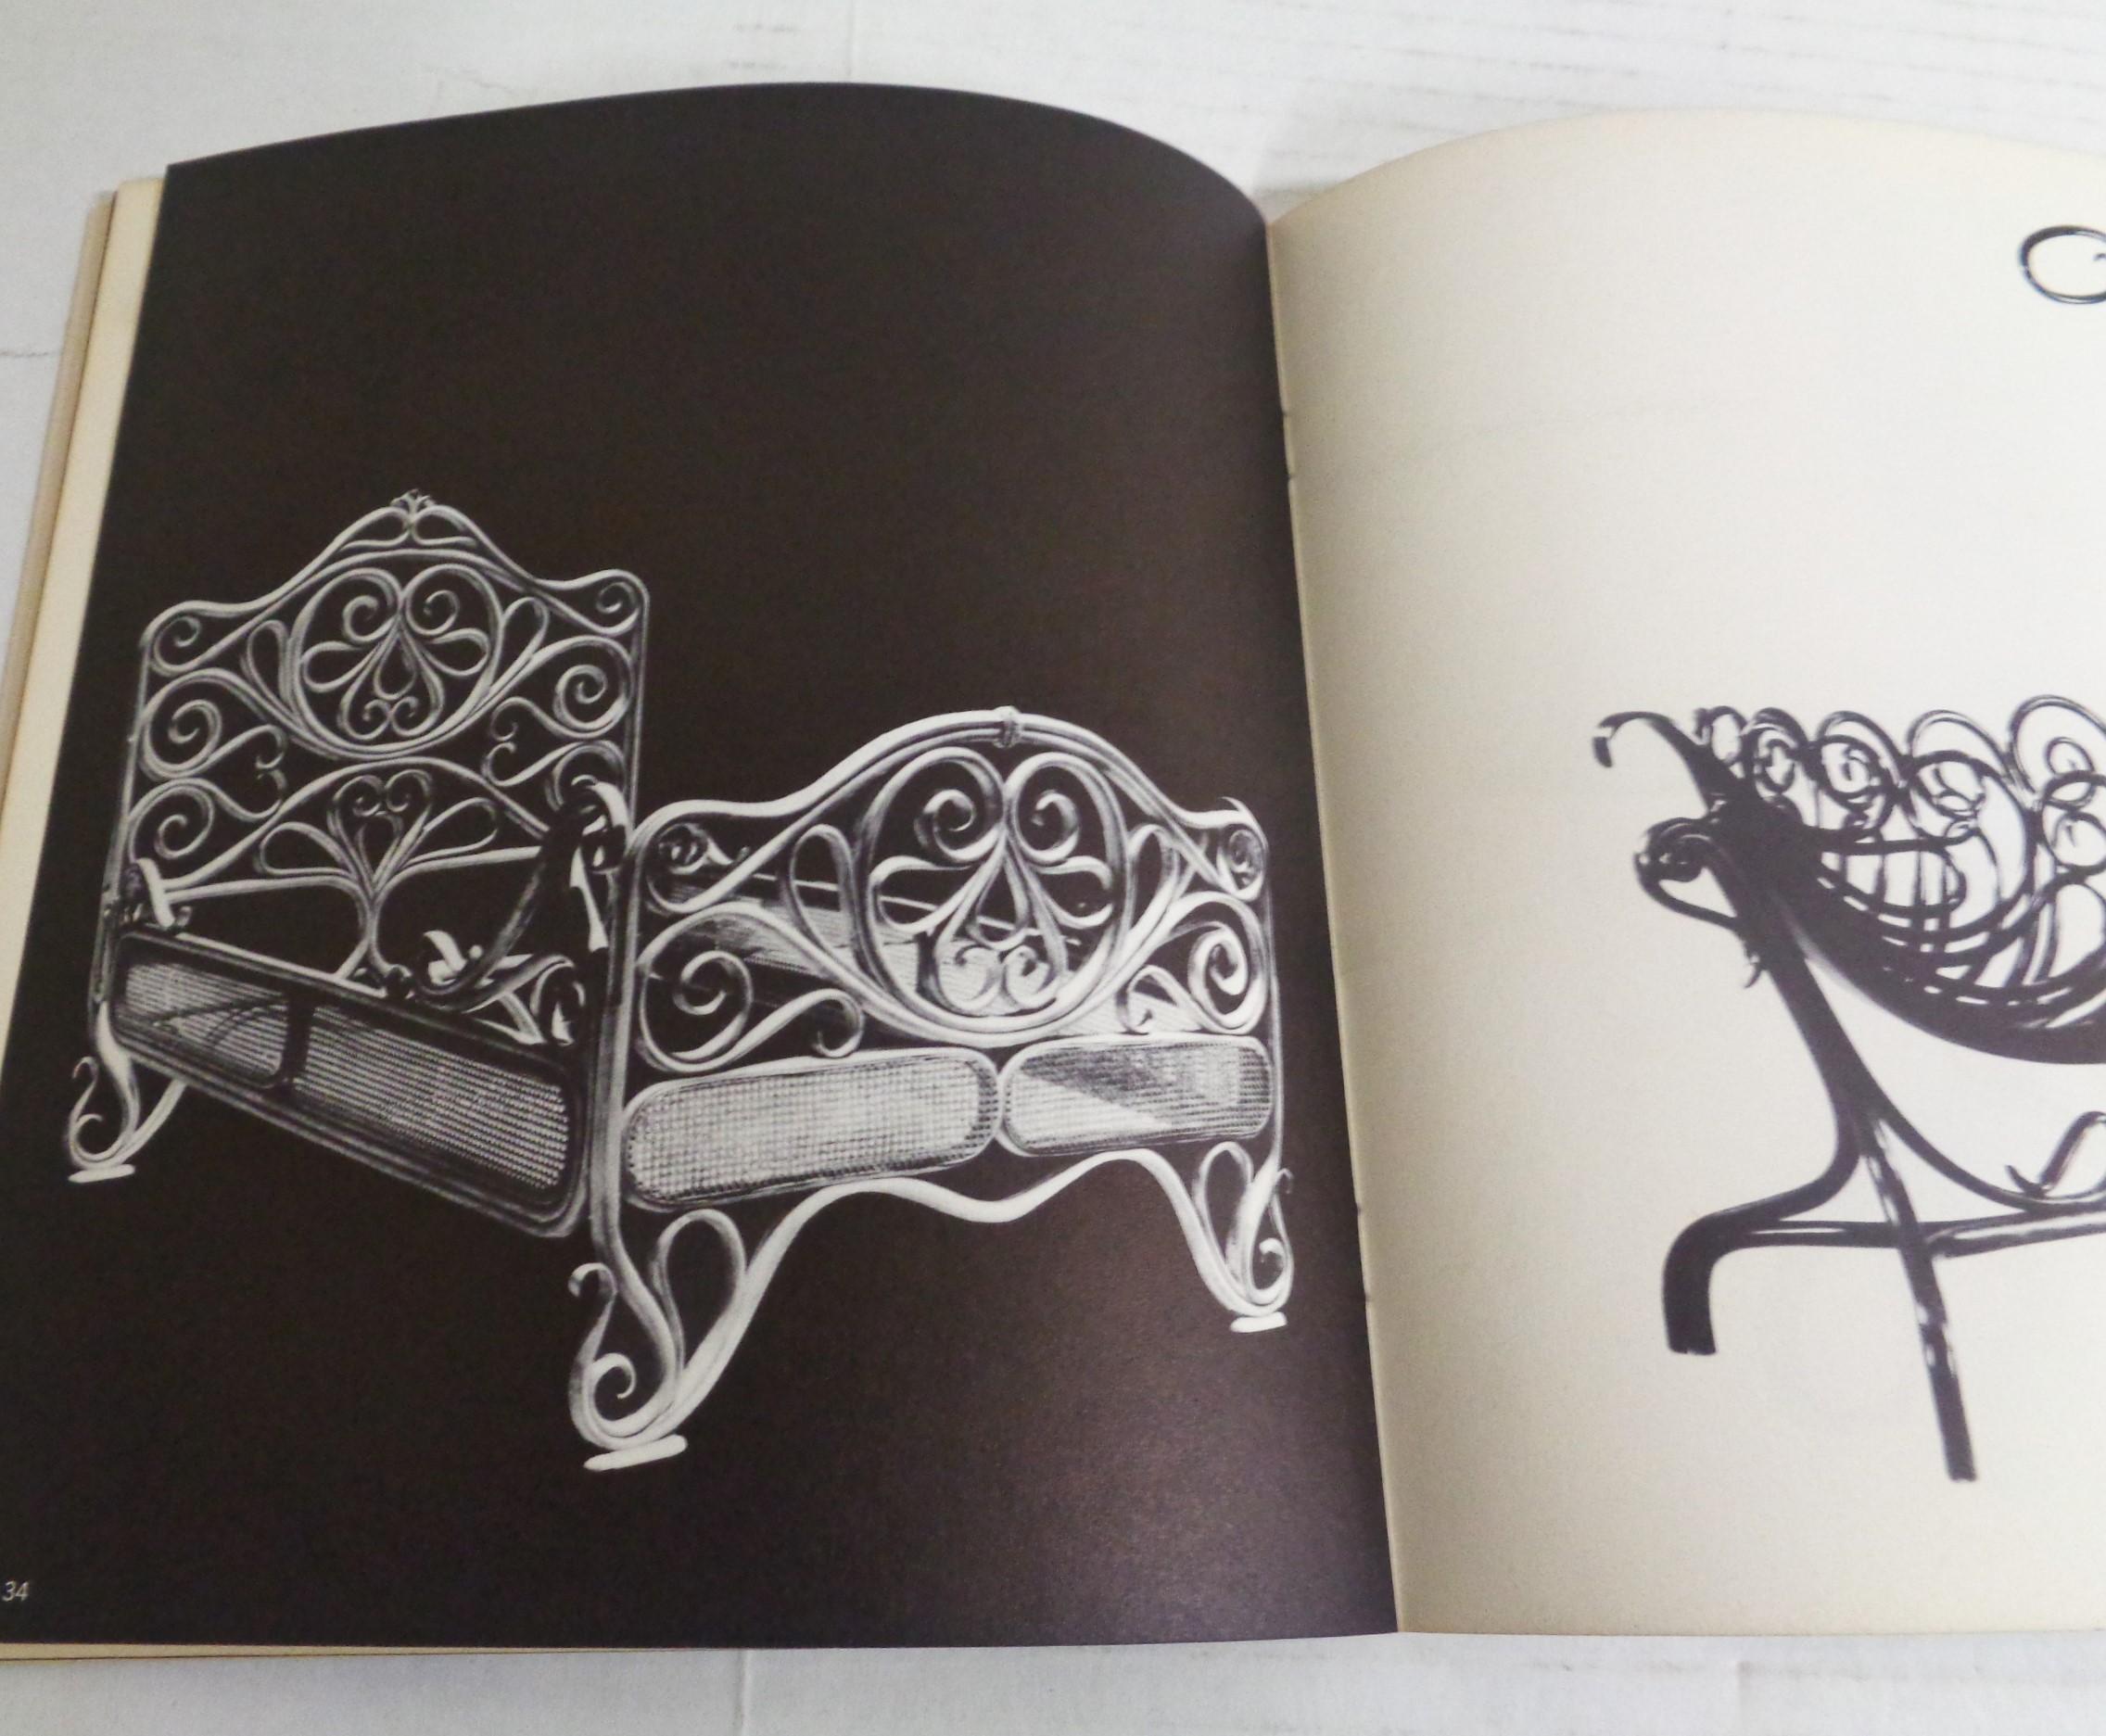 Thonet 19th C. Bentwood Furniture - UCLA Art Galleries Exhibition Catalog 1961 For Sale 4